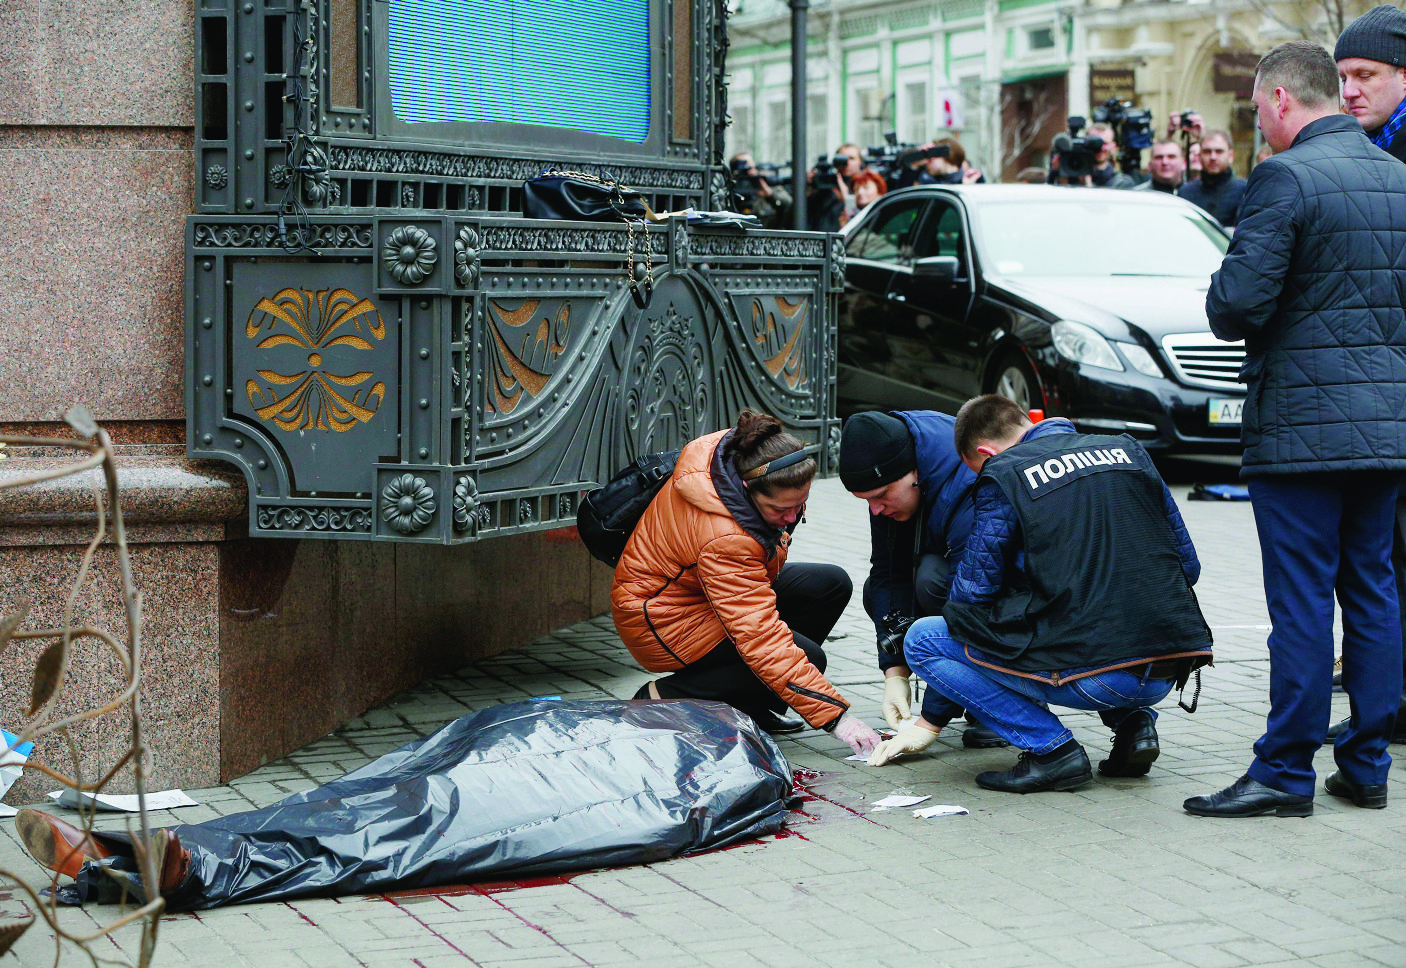 Forensic experts and police officers examine the scene following the killing of Denis Voronenkov in Kiev, Ukraine, Thursday, March 23, 2017. Ukrainian police said Voronenkov was shot dead Thursday by an unidentified gunman at the entrance of an upscale hotel in the Ukrainian capital. Voronenkov, 45, a former member of the communist faction in the lower house of Russian parliament, had moved to Ukraine last fall and had been granted Ukrainian citizenship. (AP Photo/Sergei Chuzavkov) Ukraine Killing